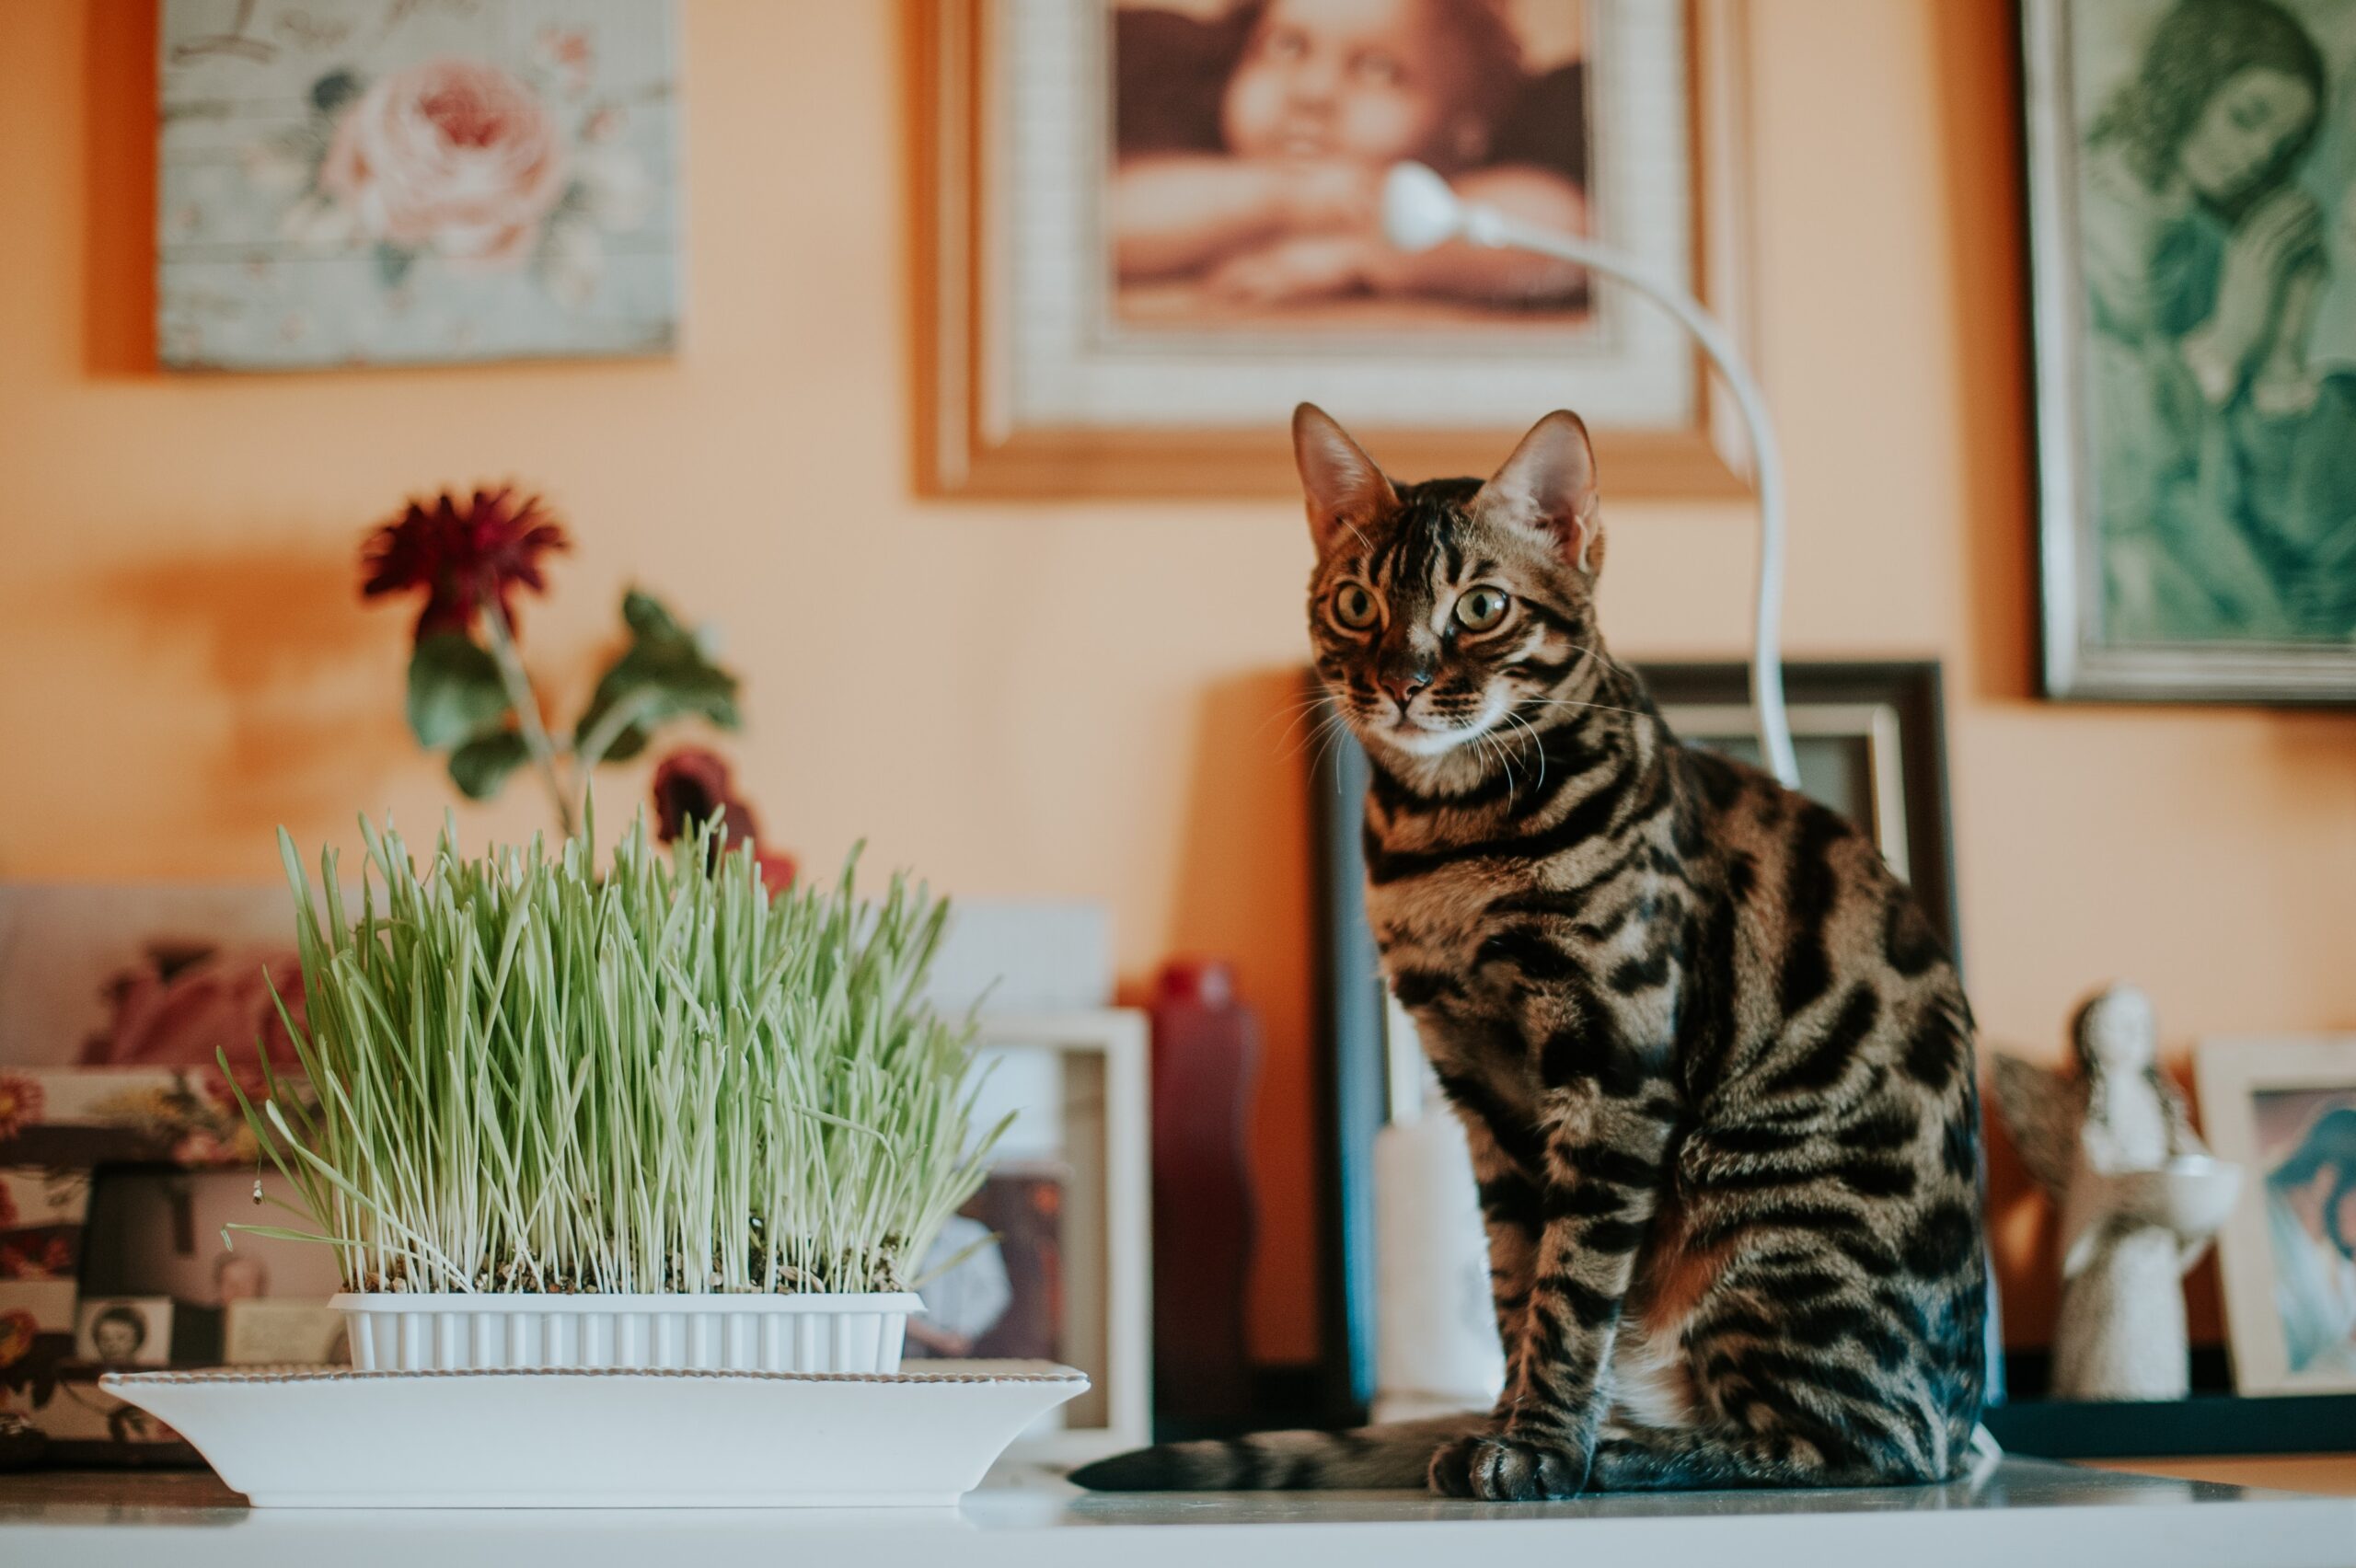 A grey and wgile cat sittin next to a tray of green wheat grass